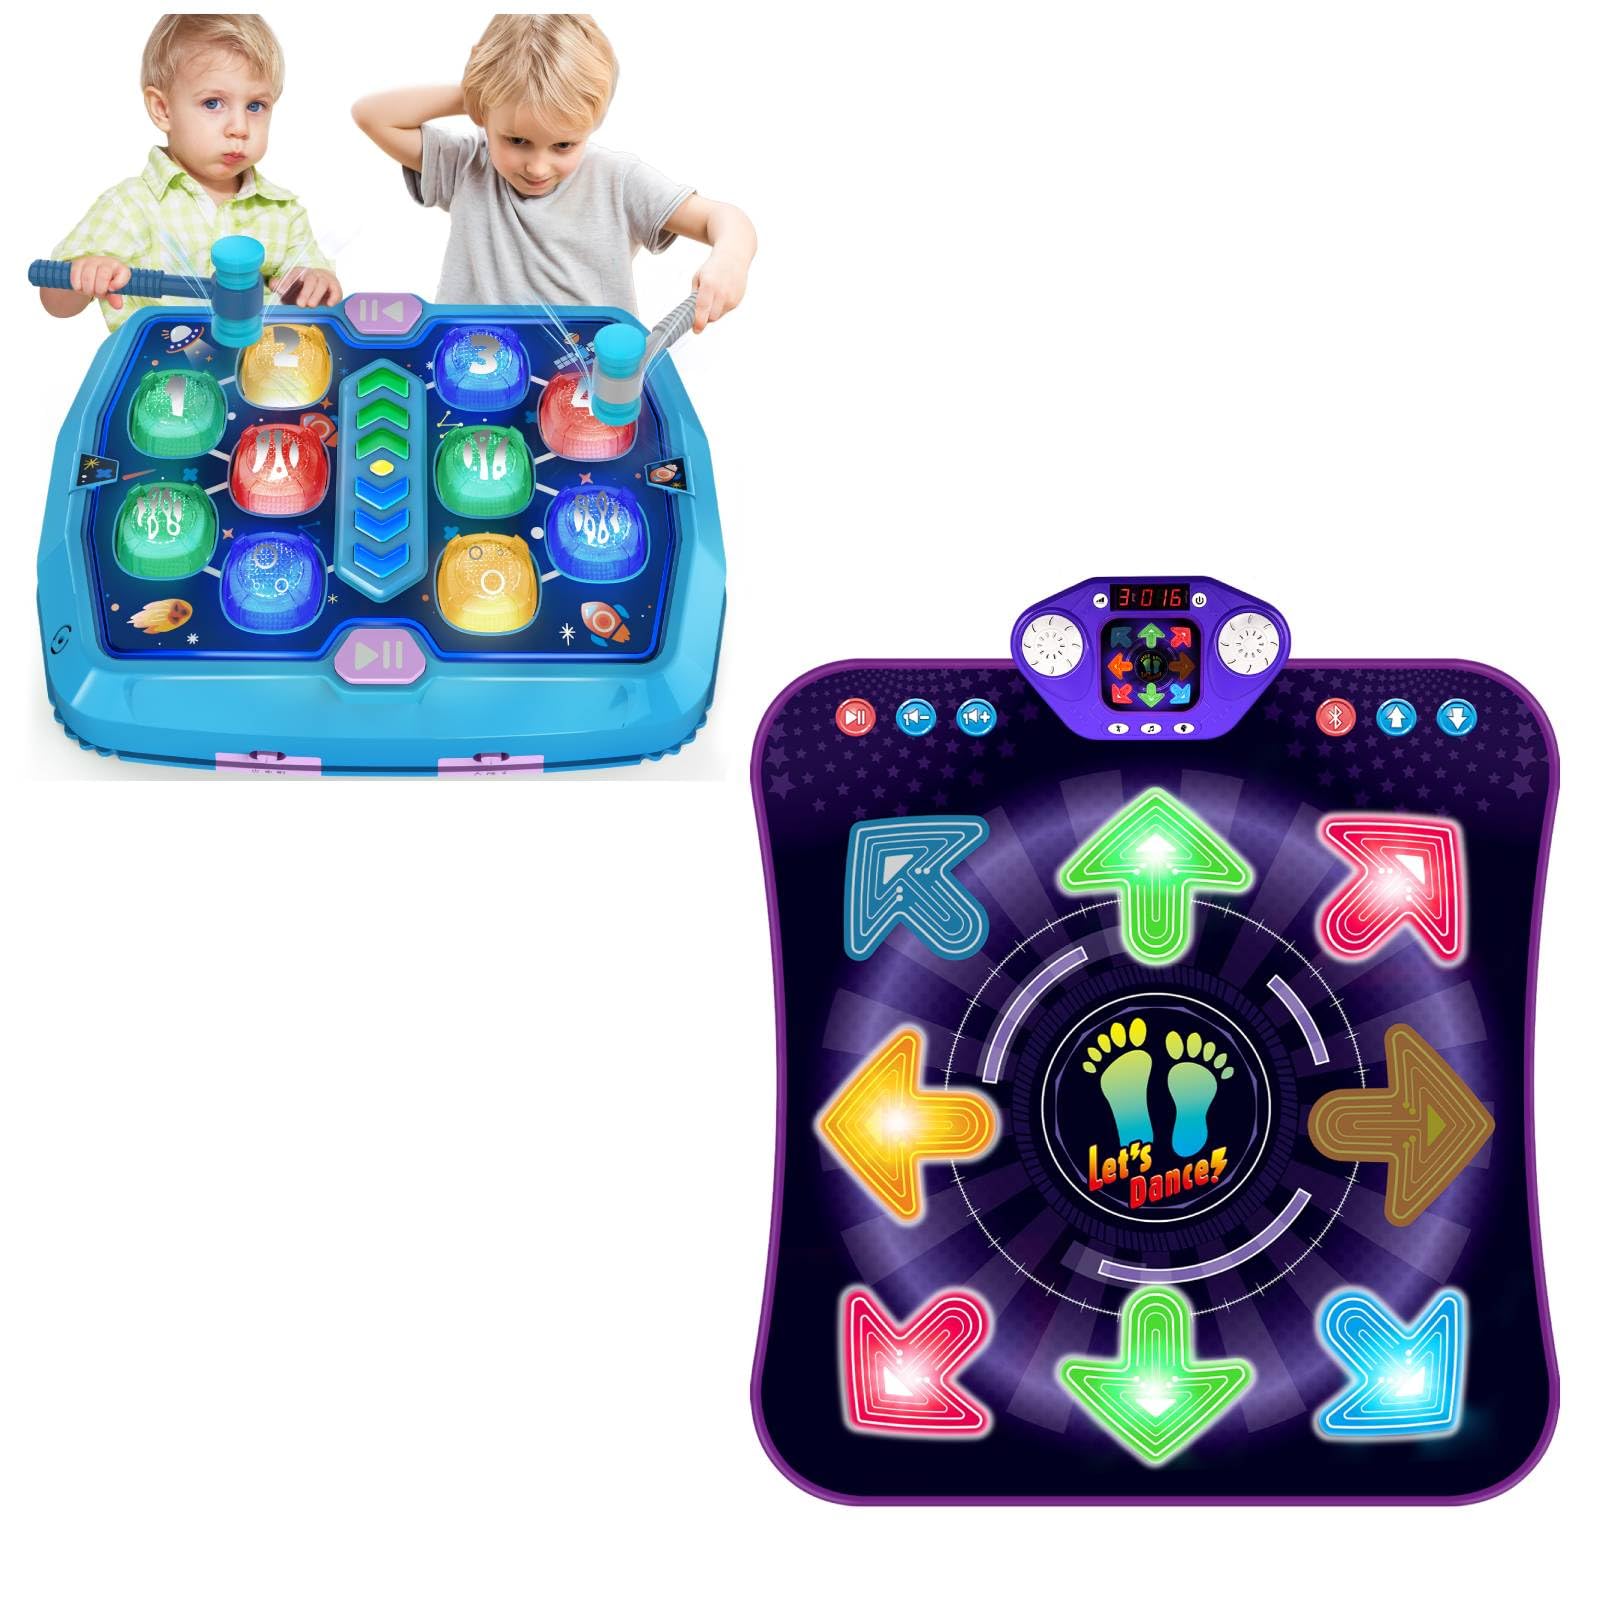 Whack a Mole Games for Toddlers - 8 Buttons Light Up Dance Mat for Kids Ages 3 4-8 8-12